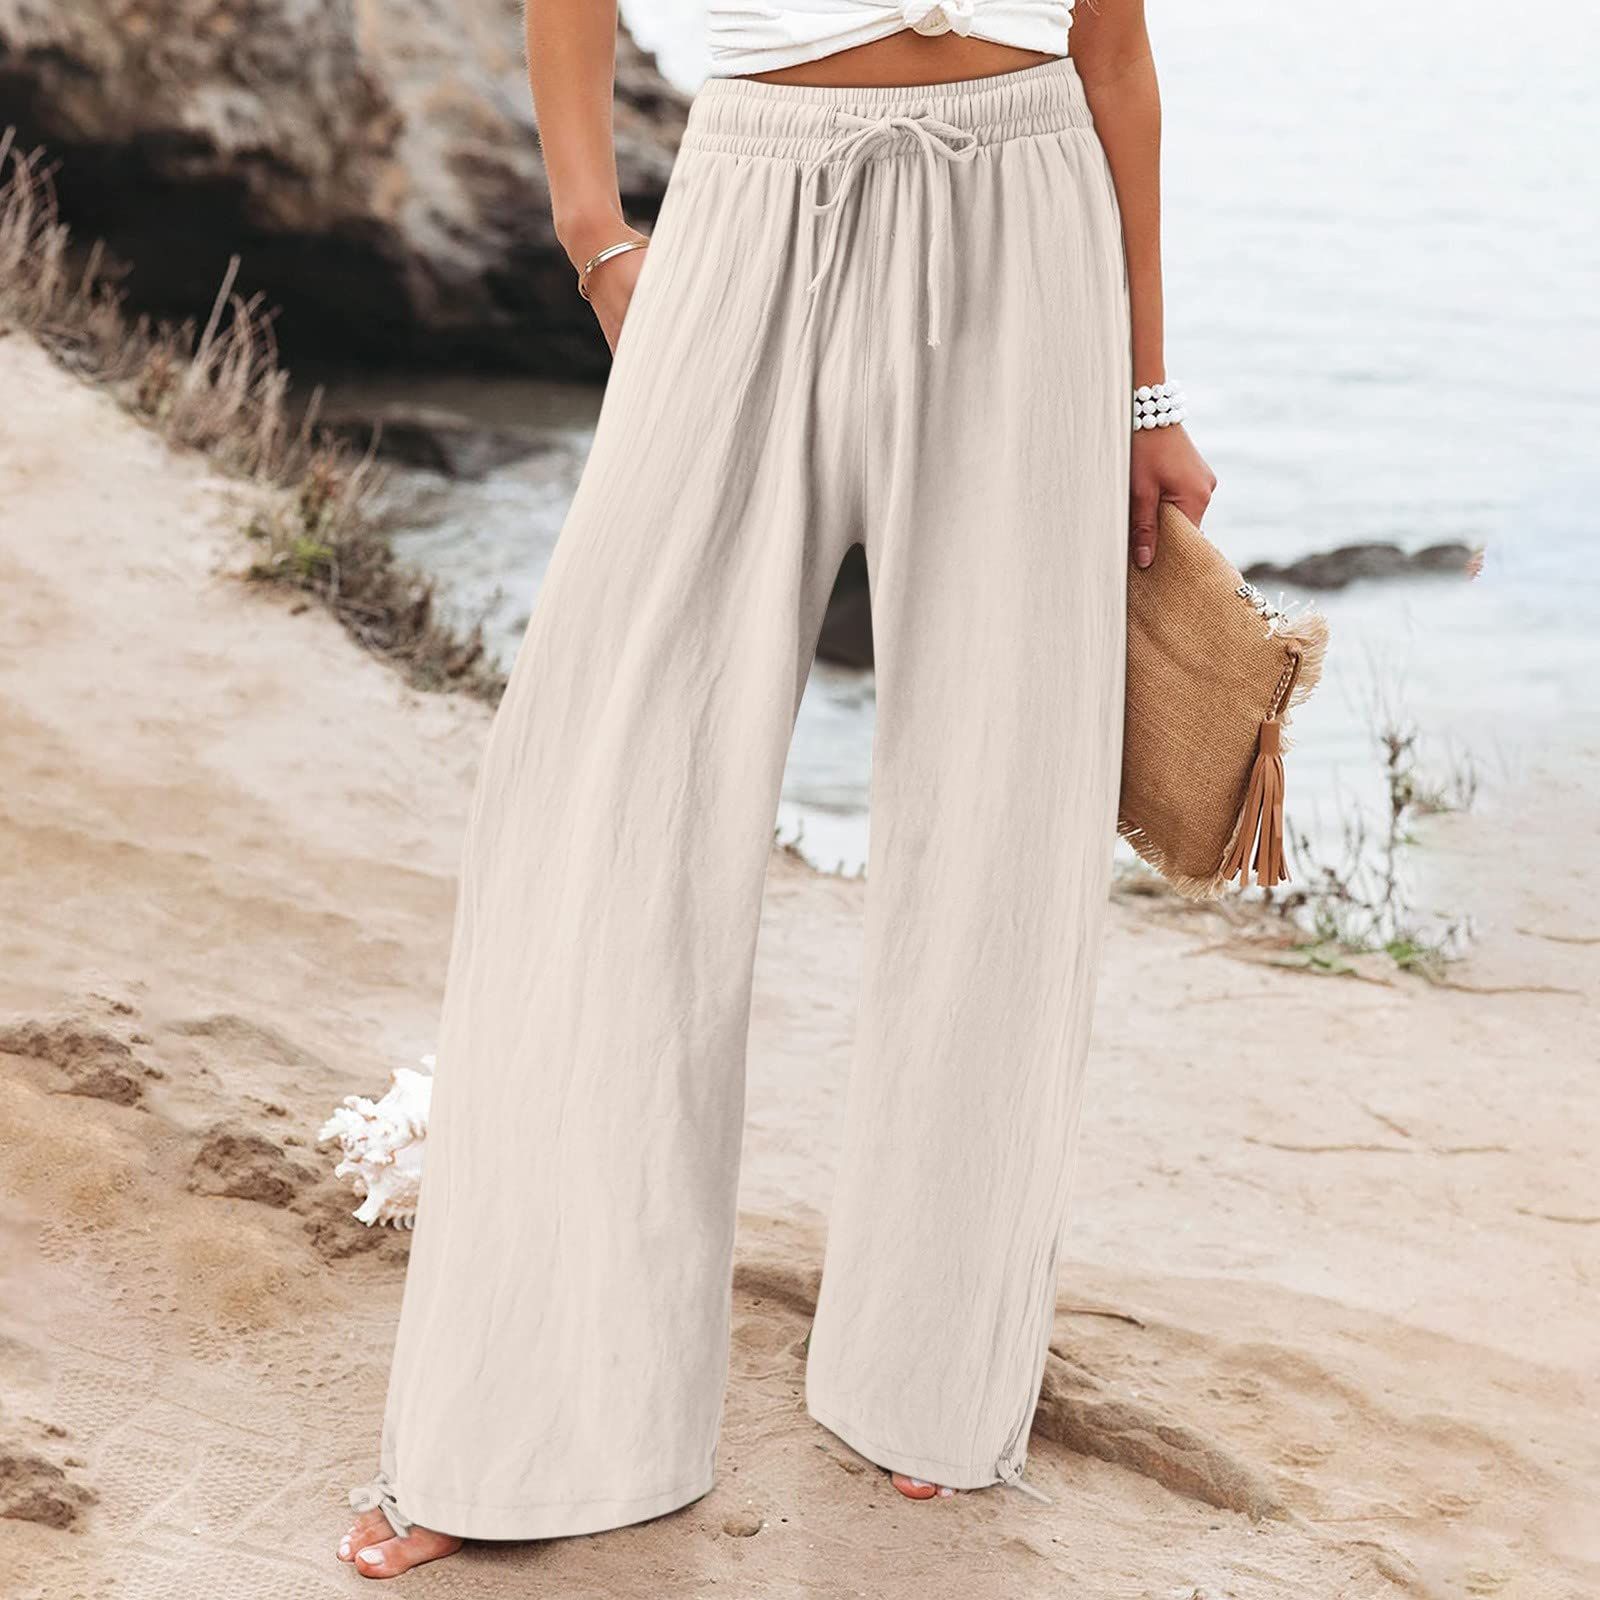 The 20 Best Linen Pants to Wear in Summer 2022 - PureWow